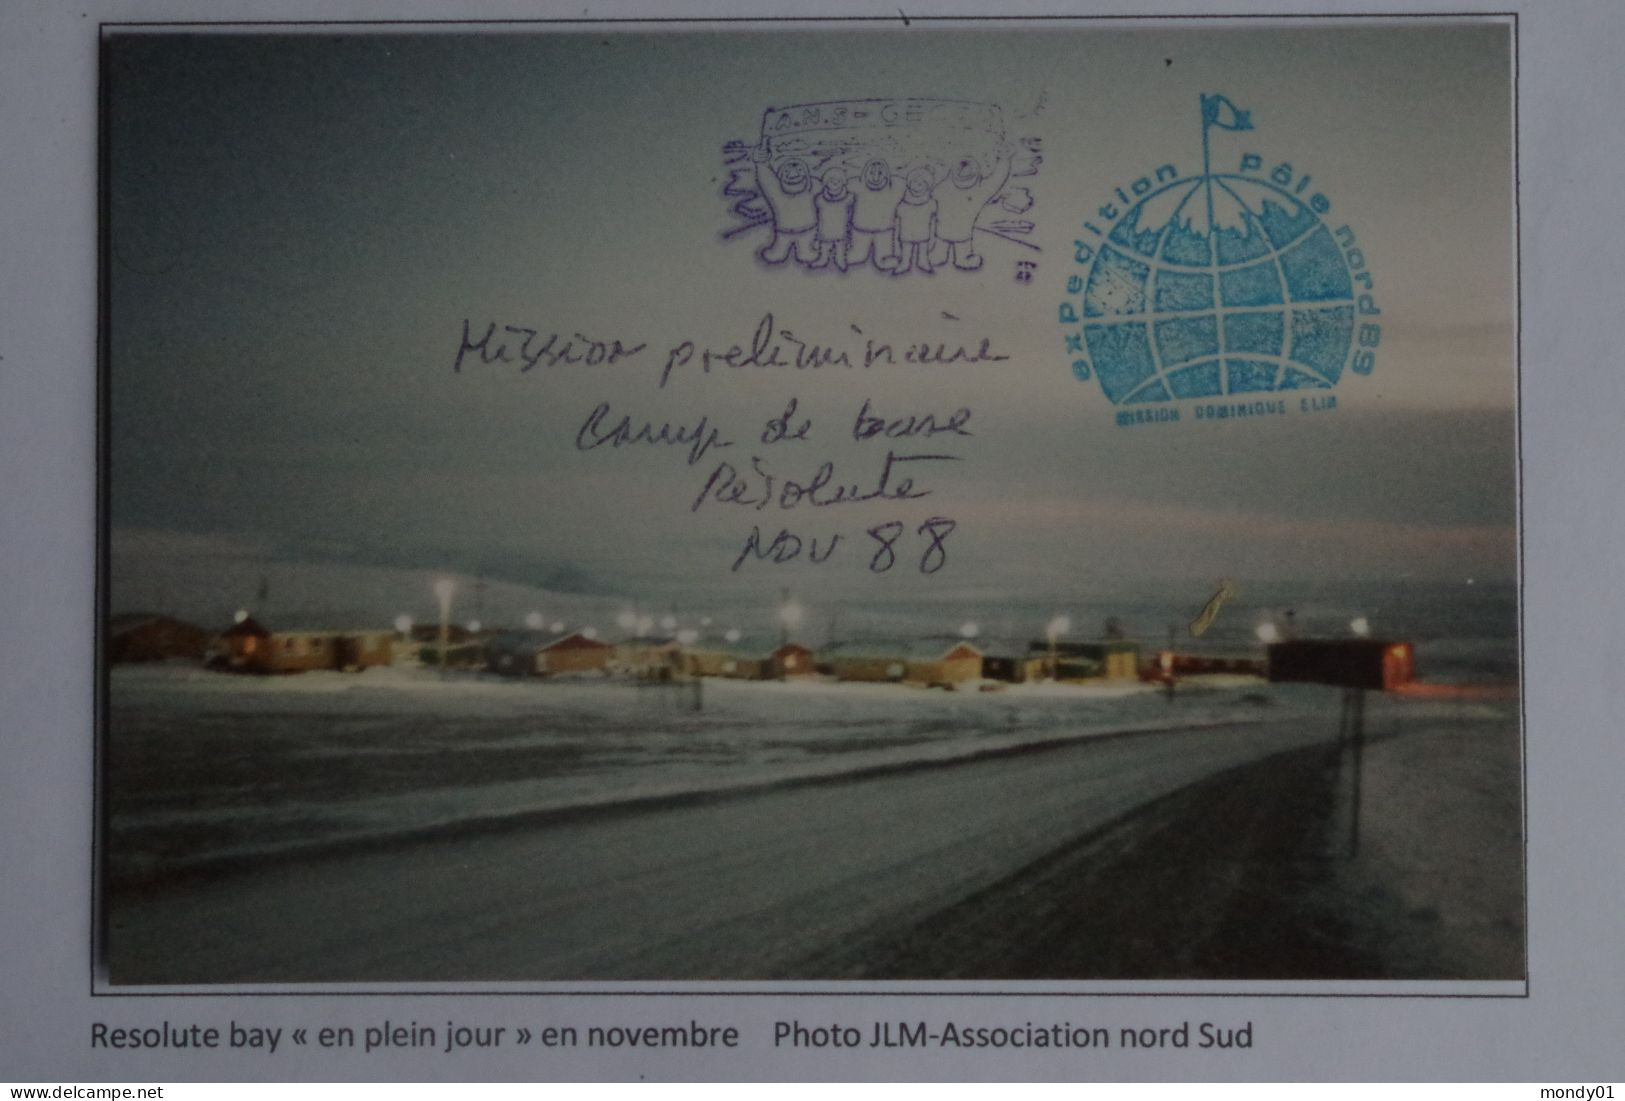 M43/ Resolute Bay Canada Pole Nord Geographique 1988 Photo  Morse Météo Phoque Seal Renard Drifting Ice Island TAAF - Climate & Meteorology